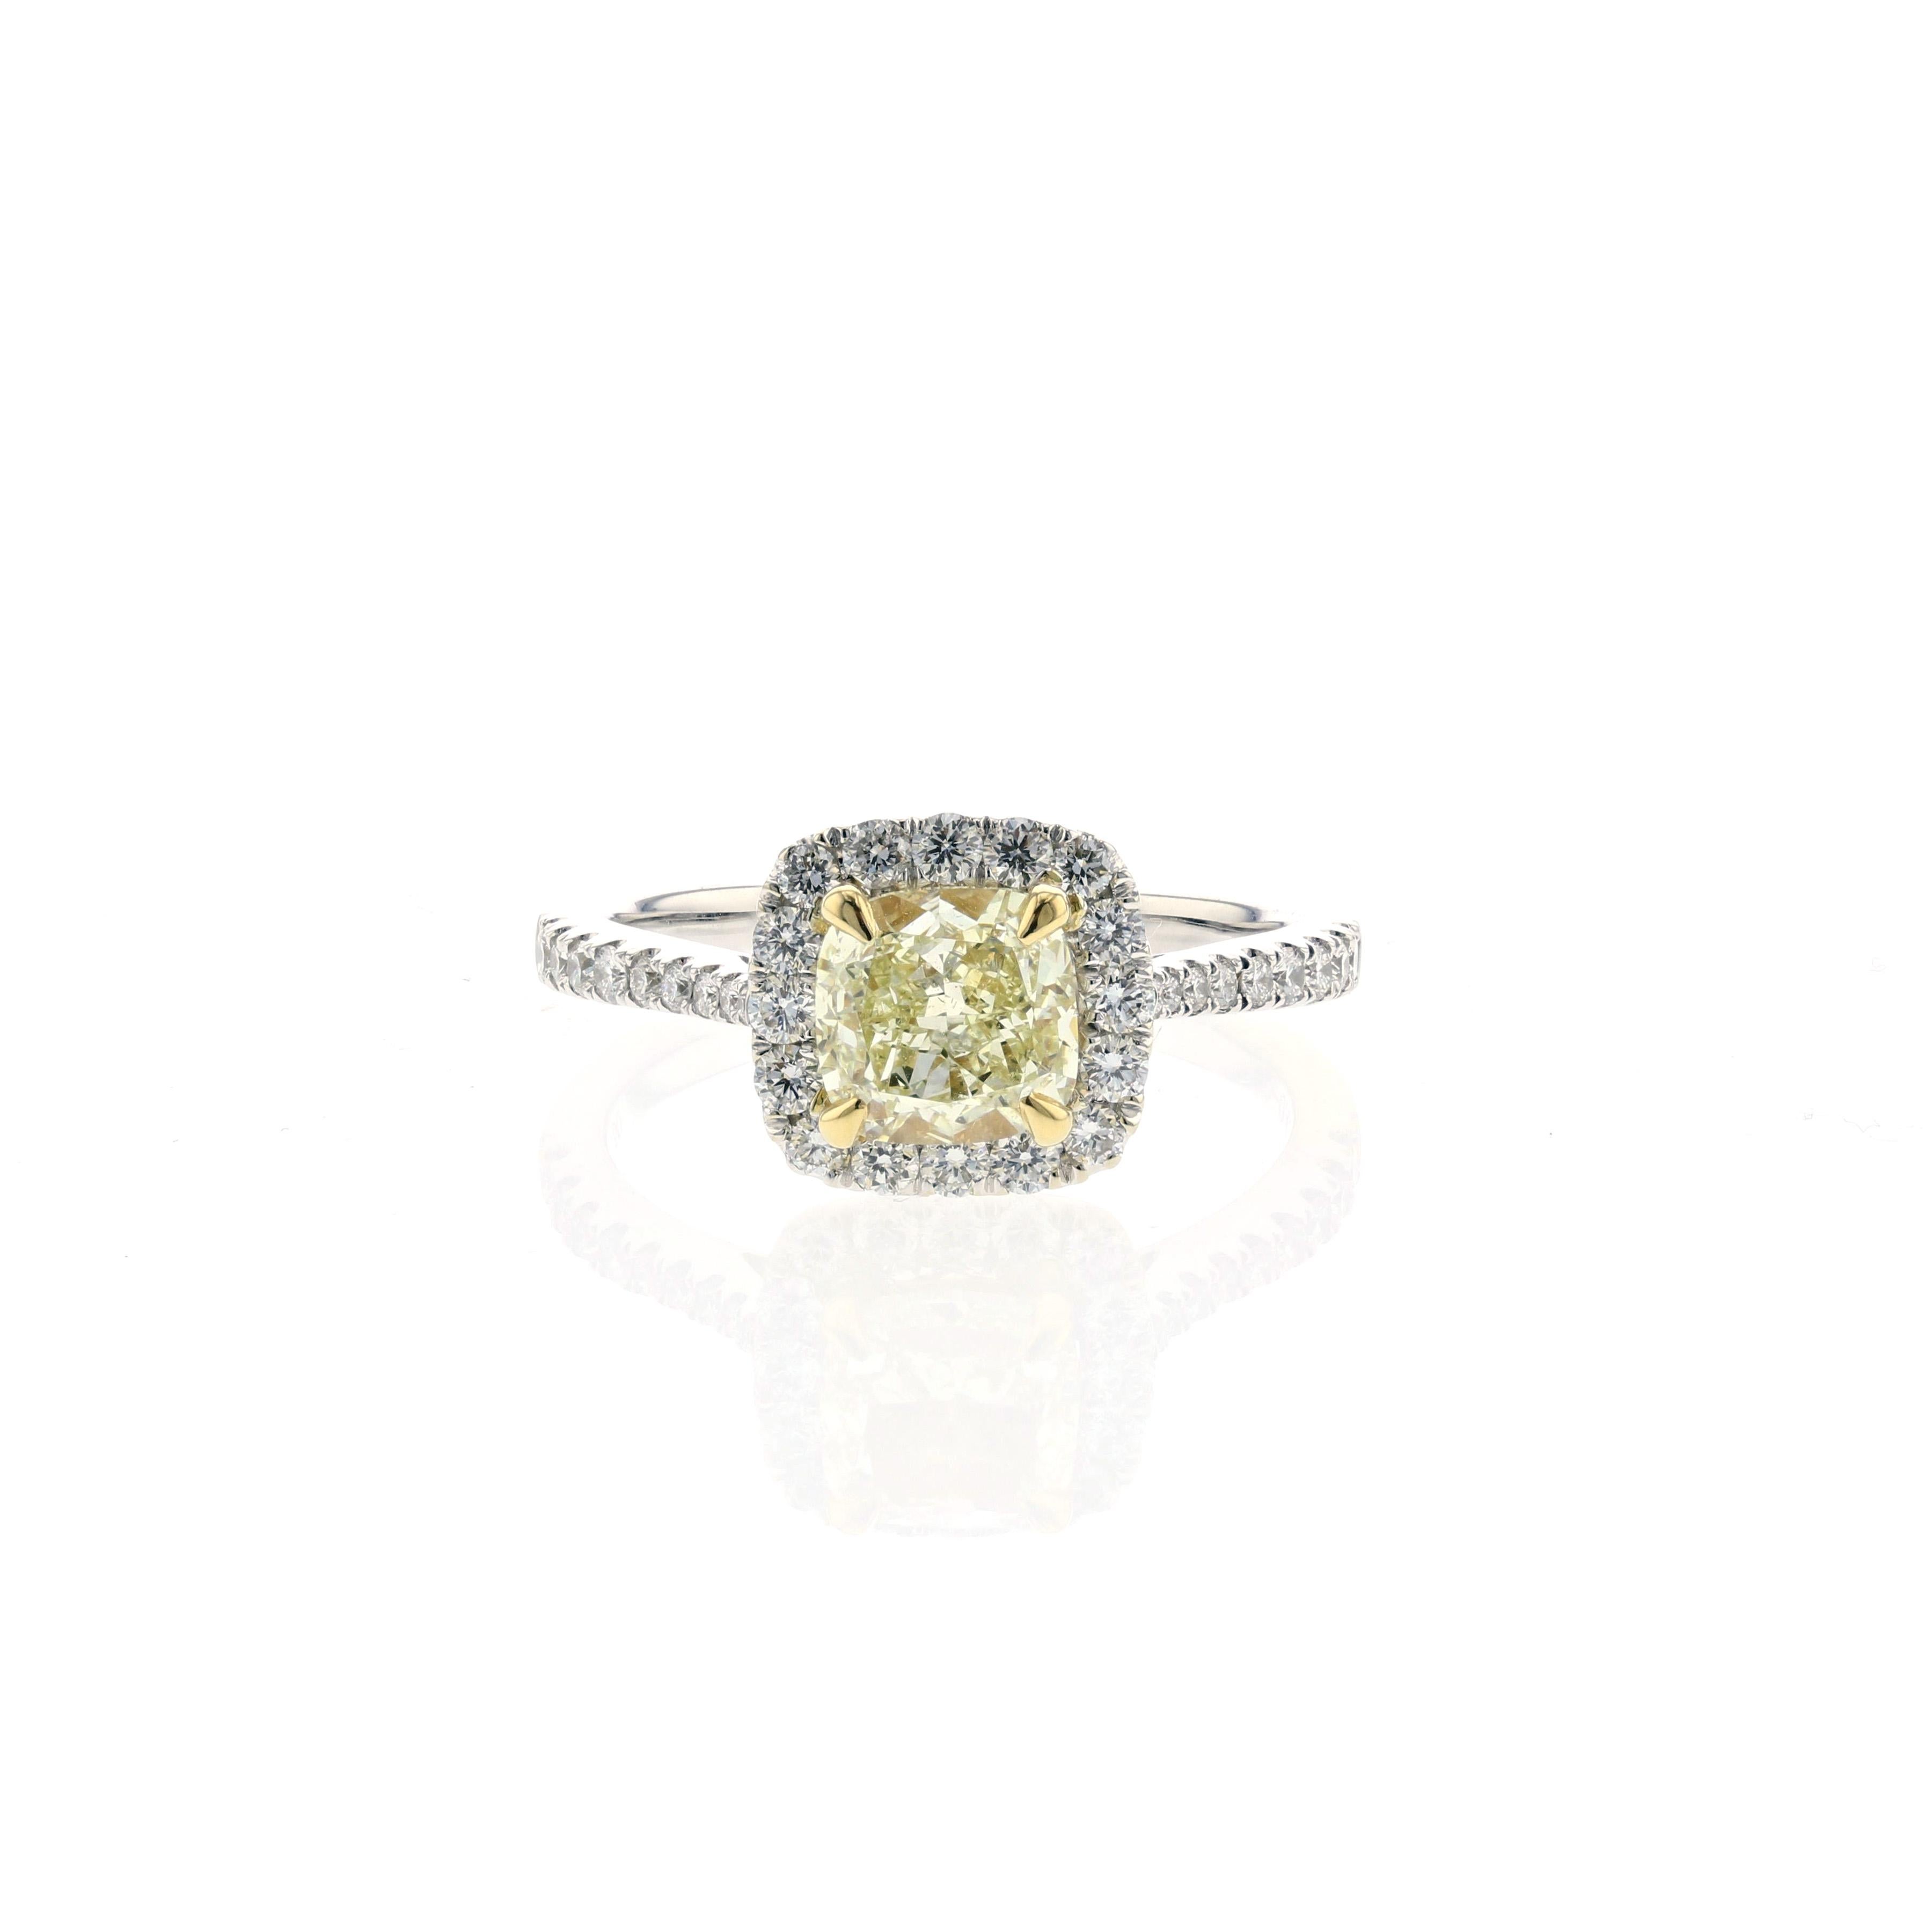 Engagement ring in 18K white gold featuring a cushion-cut yellow diamond that is halo set by round brilliant-cut diamonds and round diamonds down the band.  The center diamond totals 1.55 carats; GIA certified as a W-X color and VS1 clarity.  In